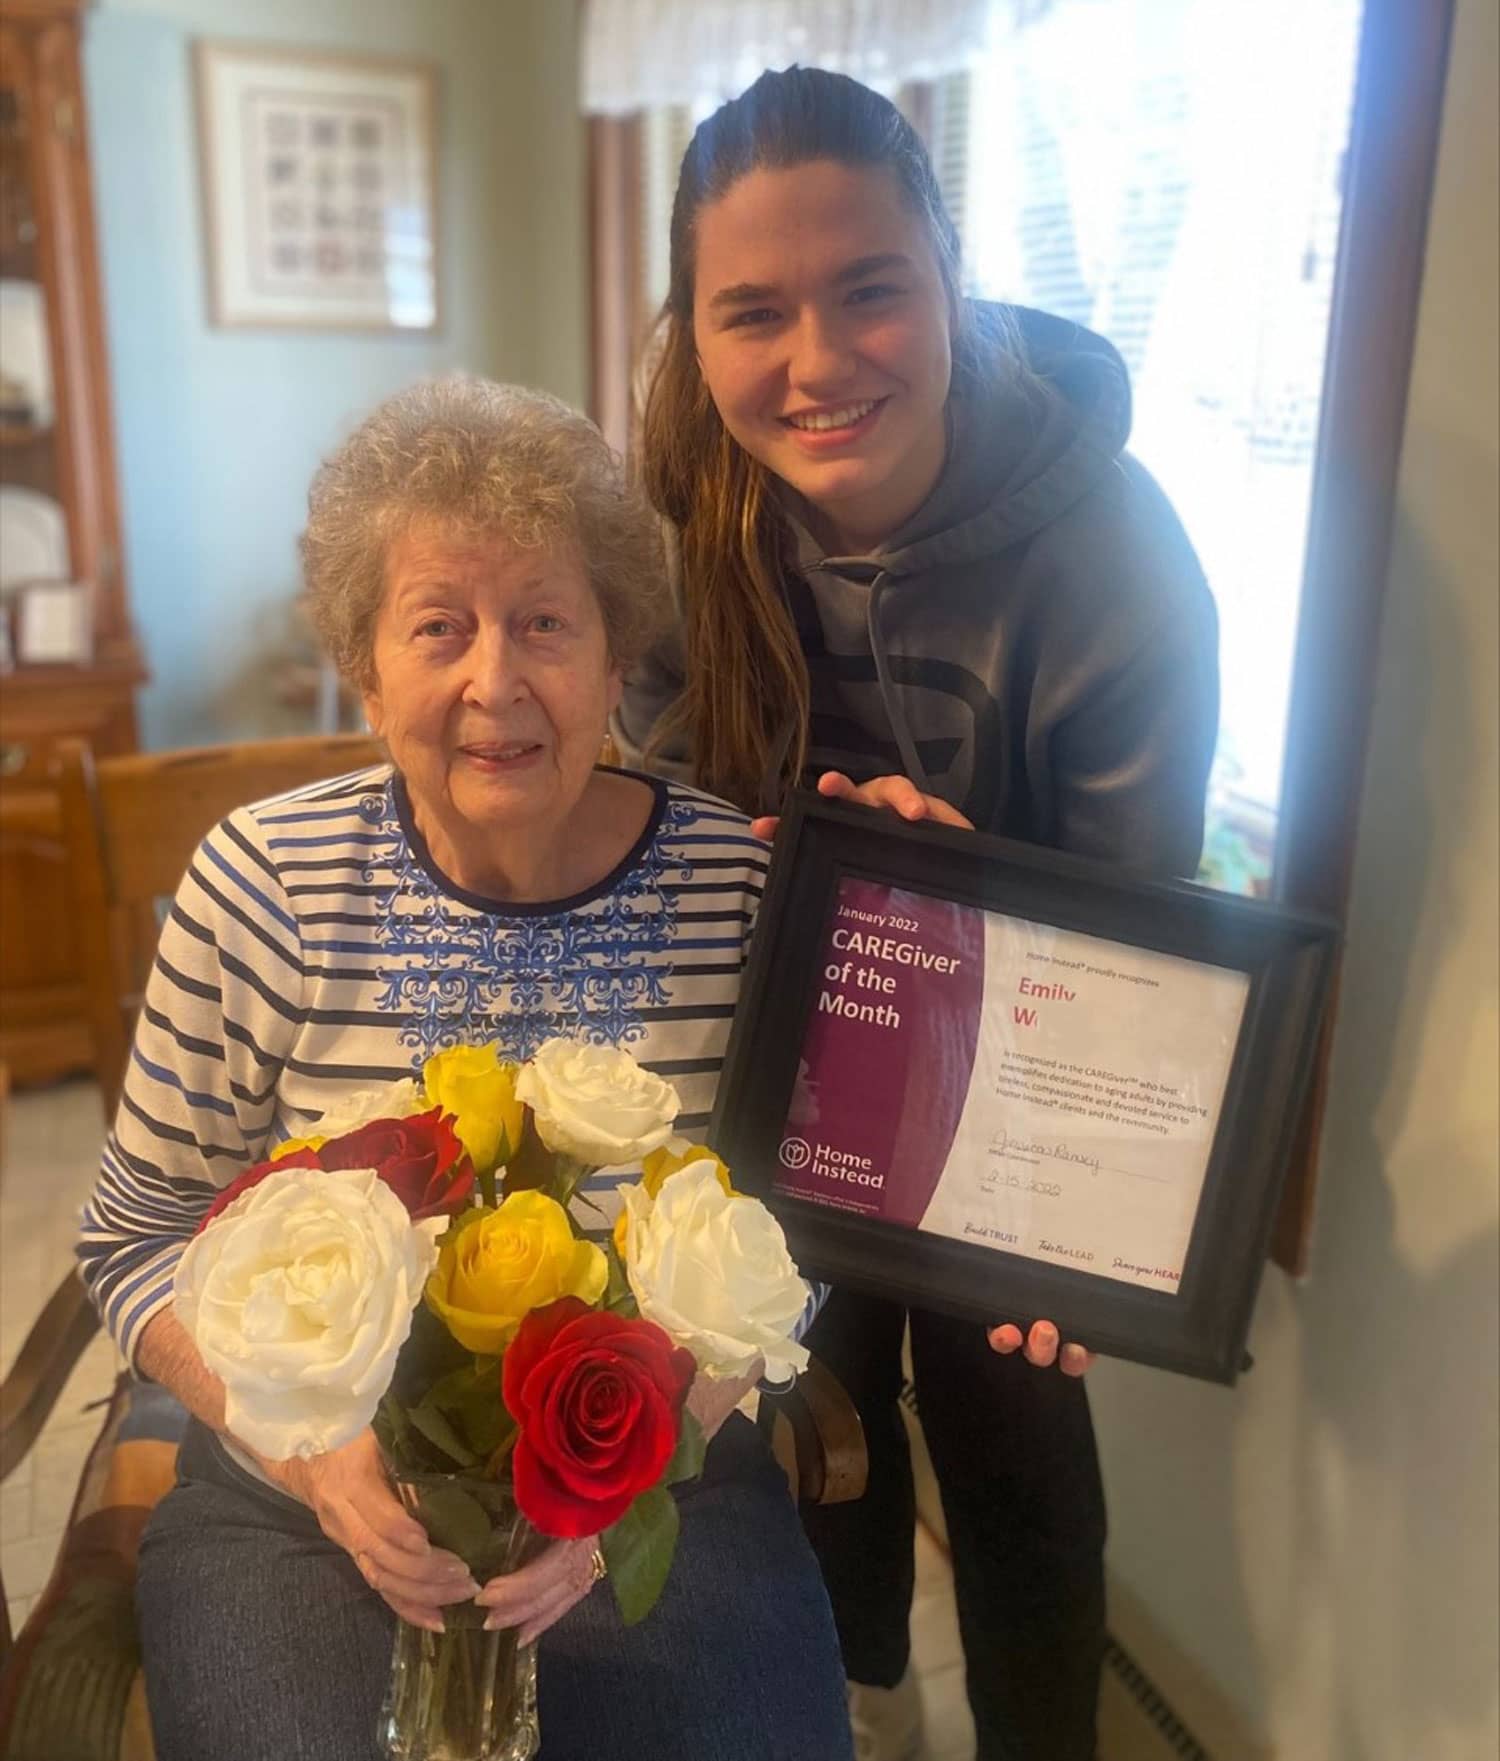 Emily W. CAREGiver of the Month - January 2022